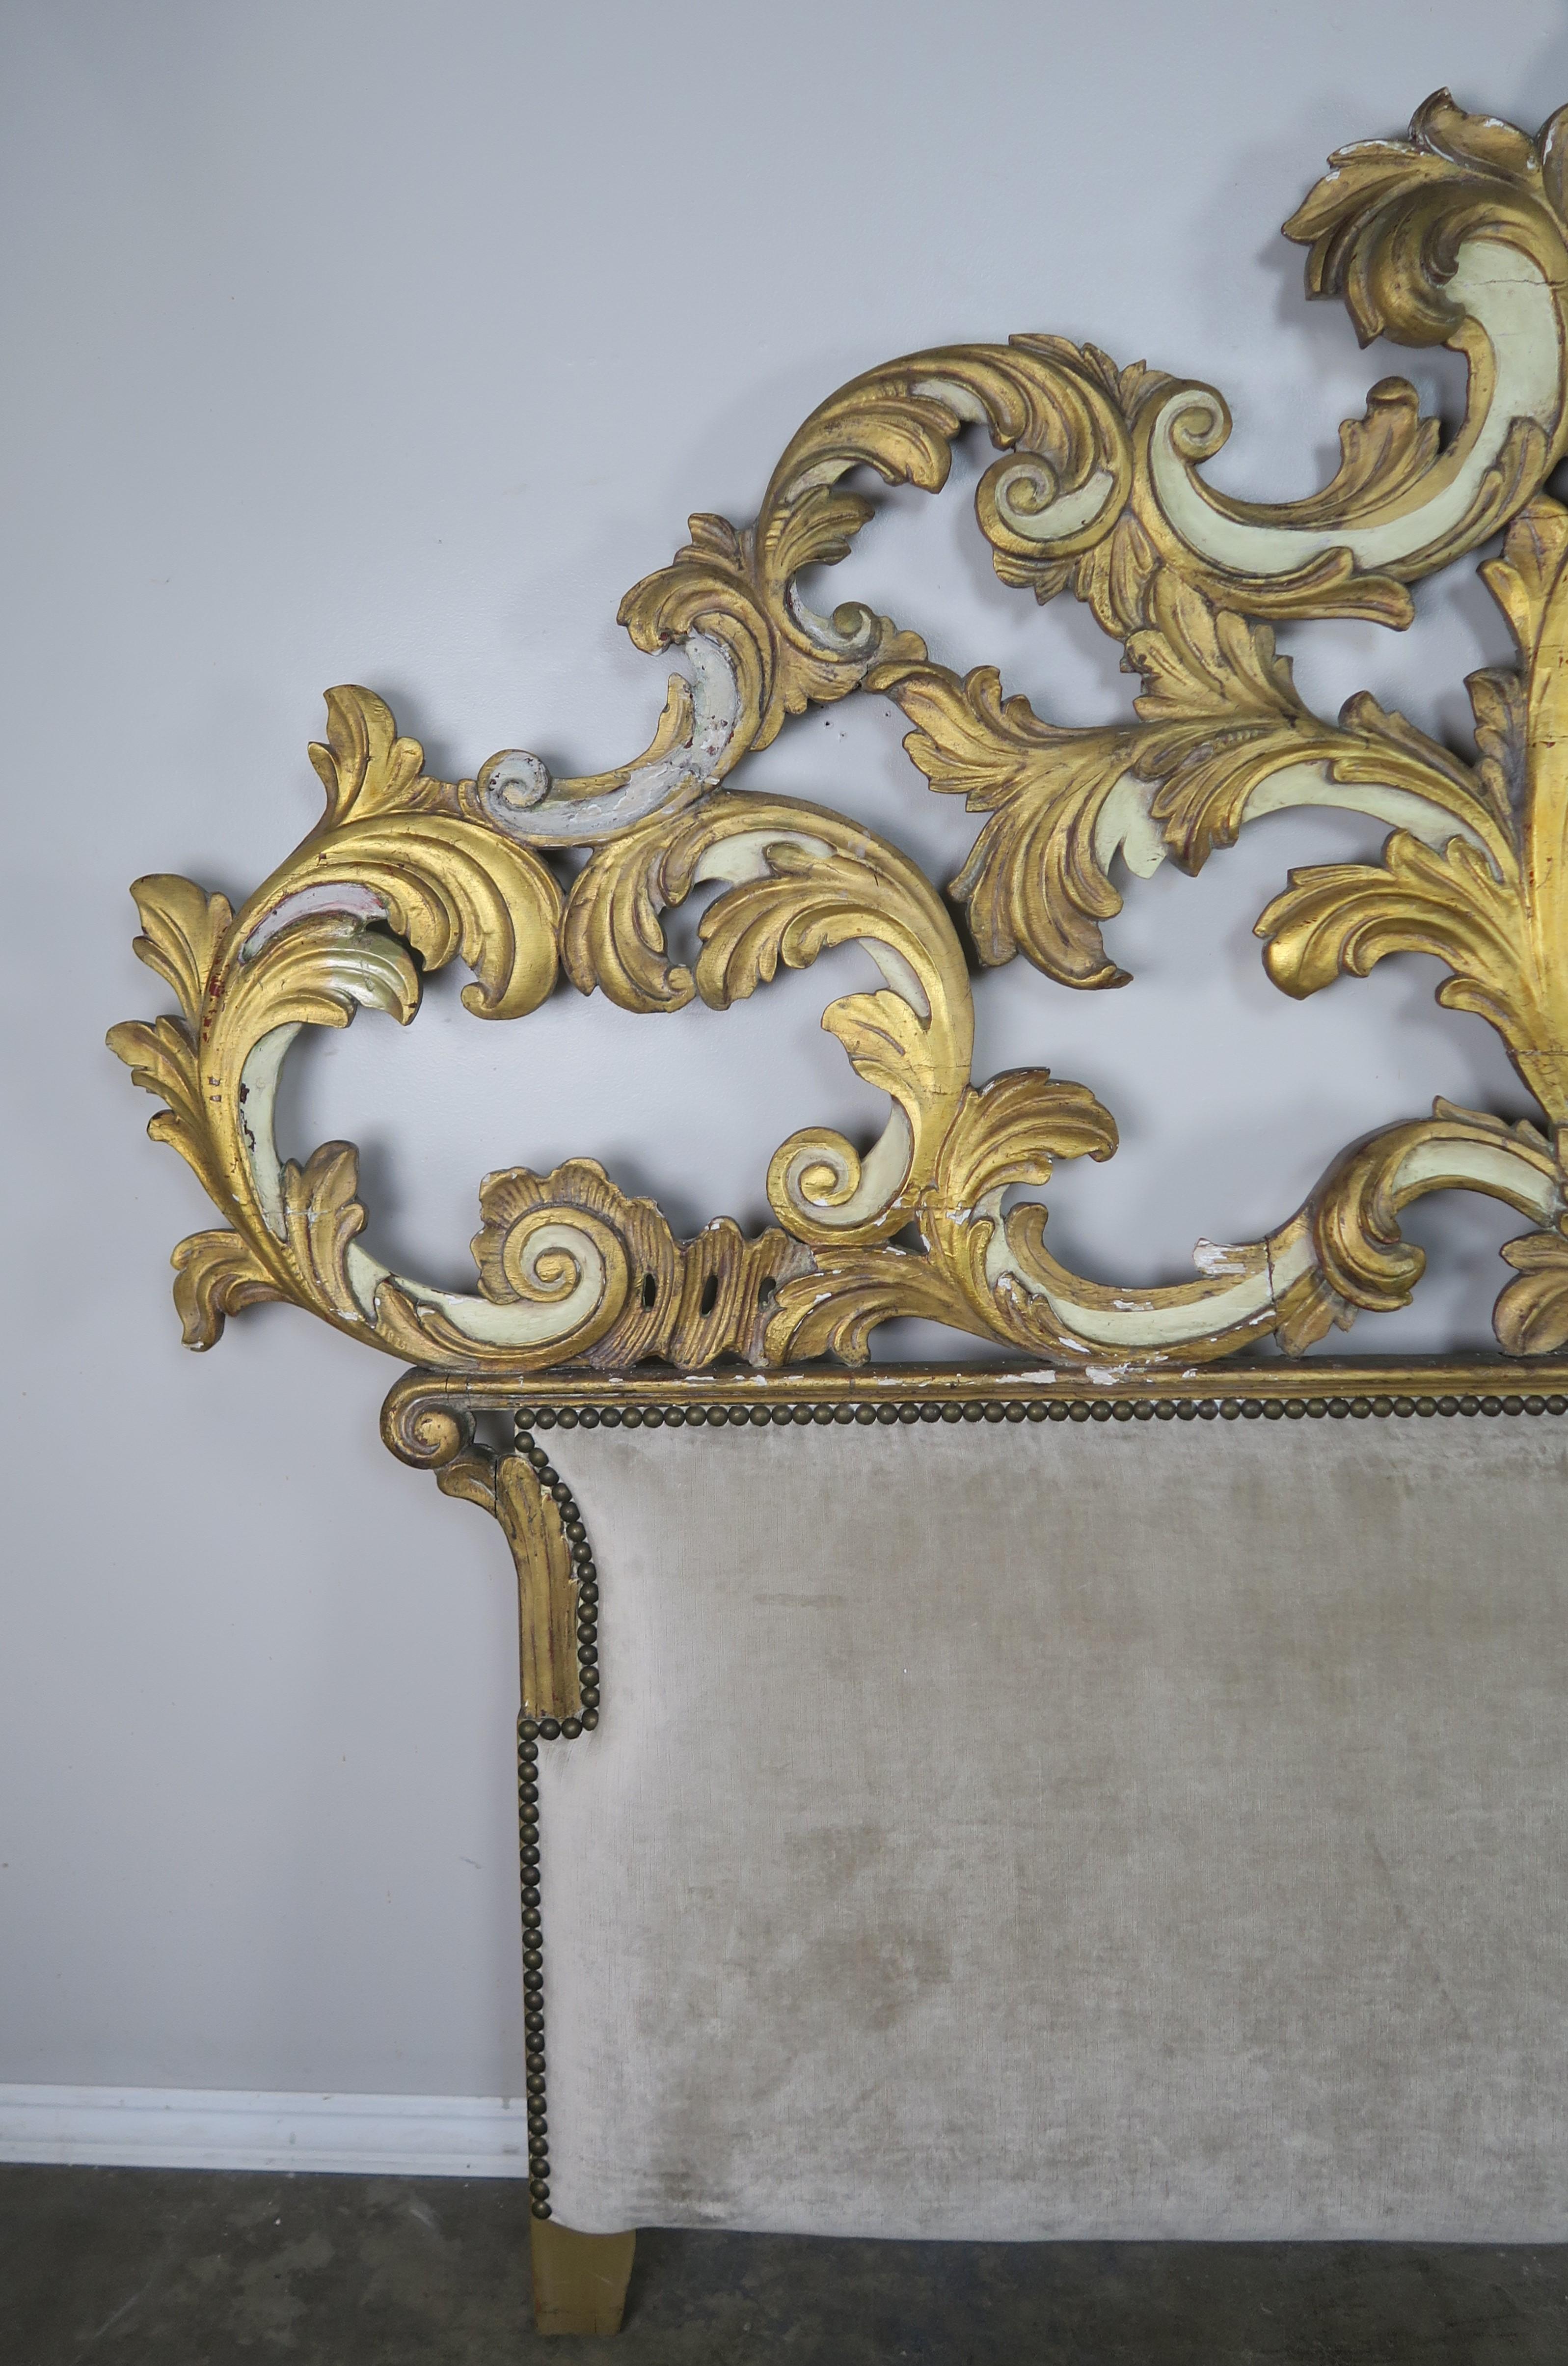 Monumental size painted and gold leaf carved headboard made with scrollwork and swirling acanthus leaves throughout. The headboard is newly reupholstered in a neutral colored velvet with nailhead trim detail.